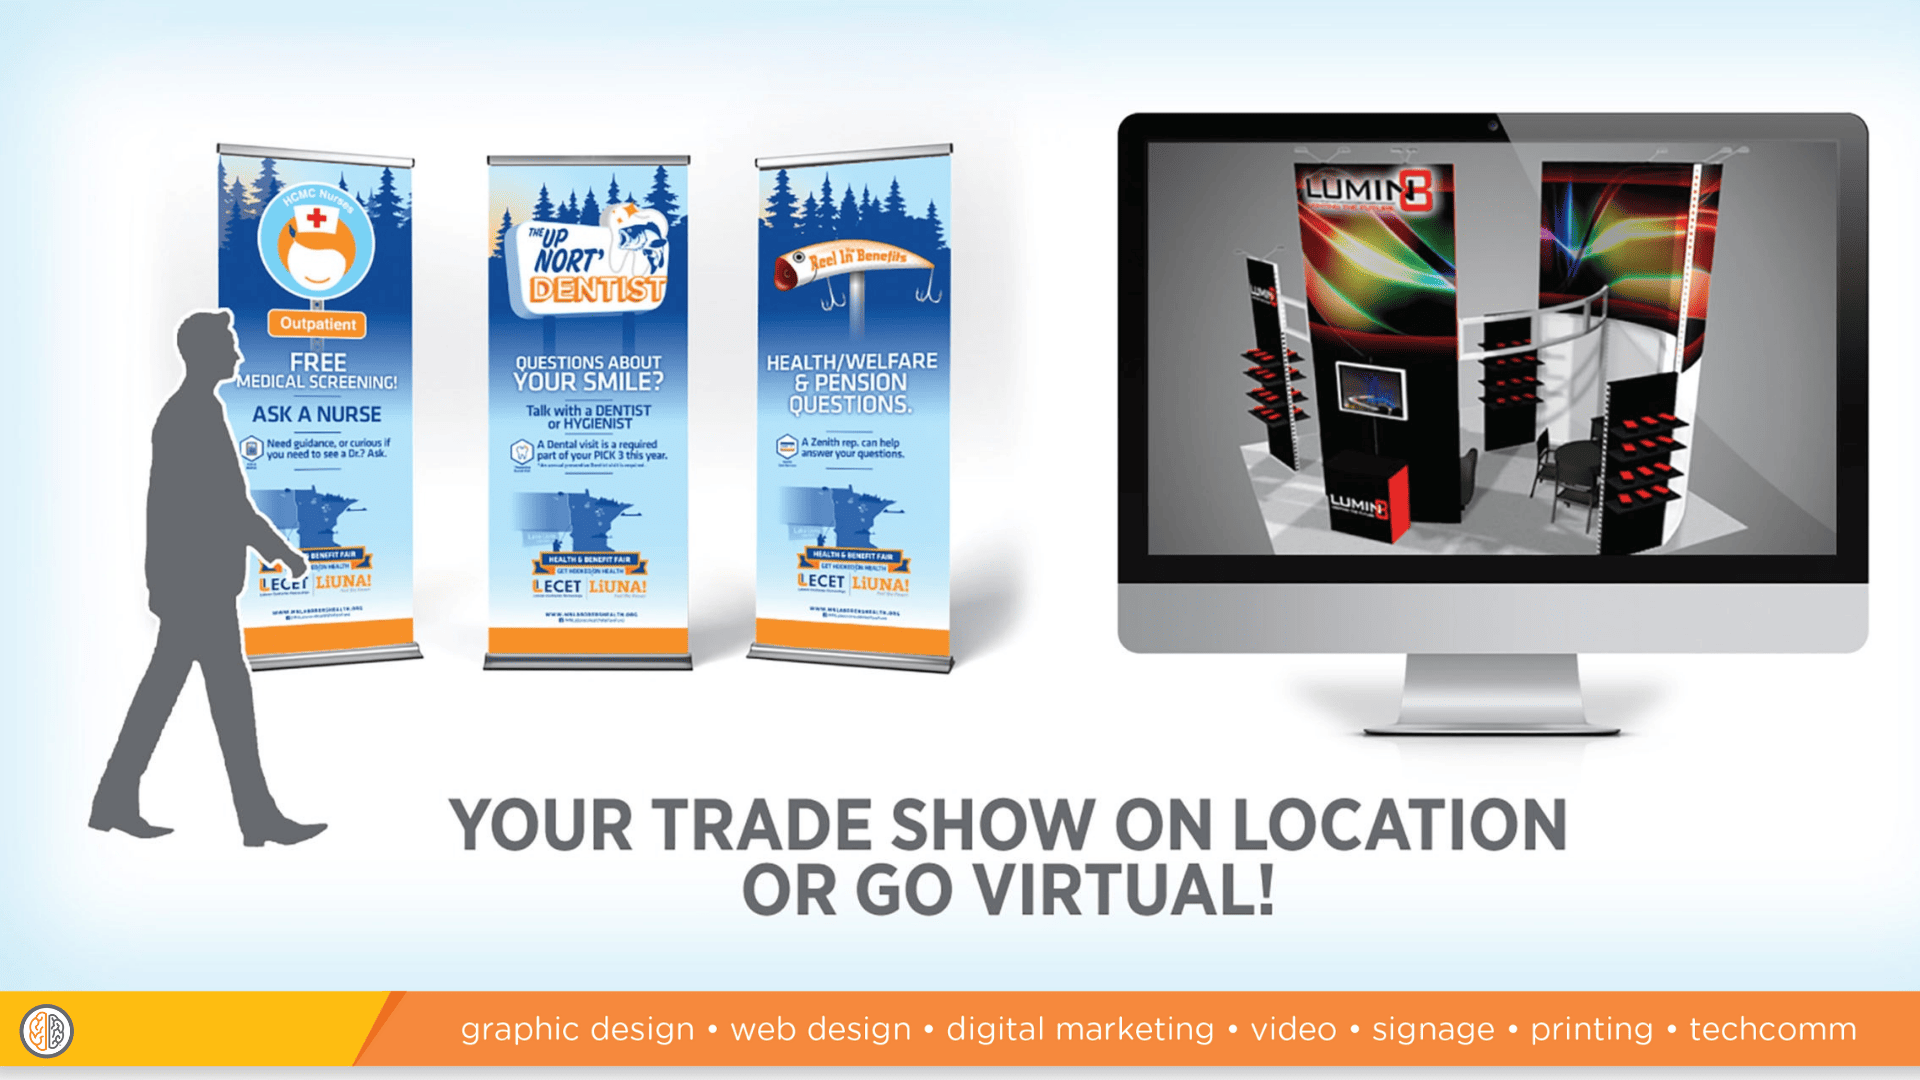 Go all in at Your Trade Show with Marketing!